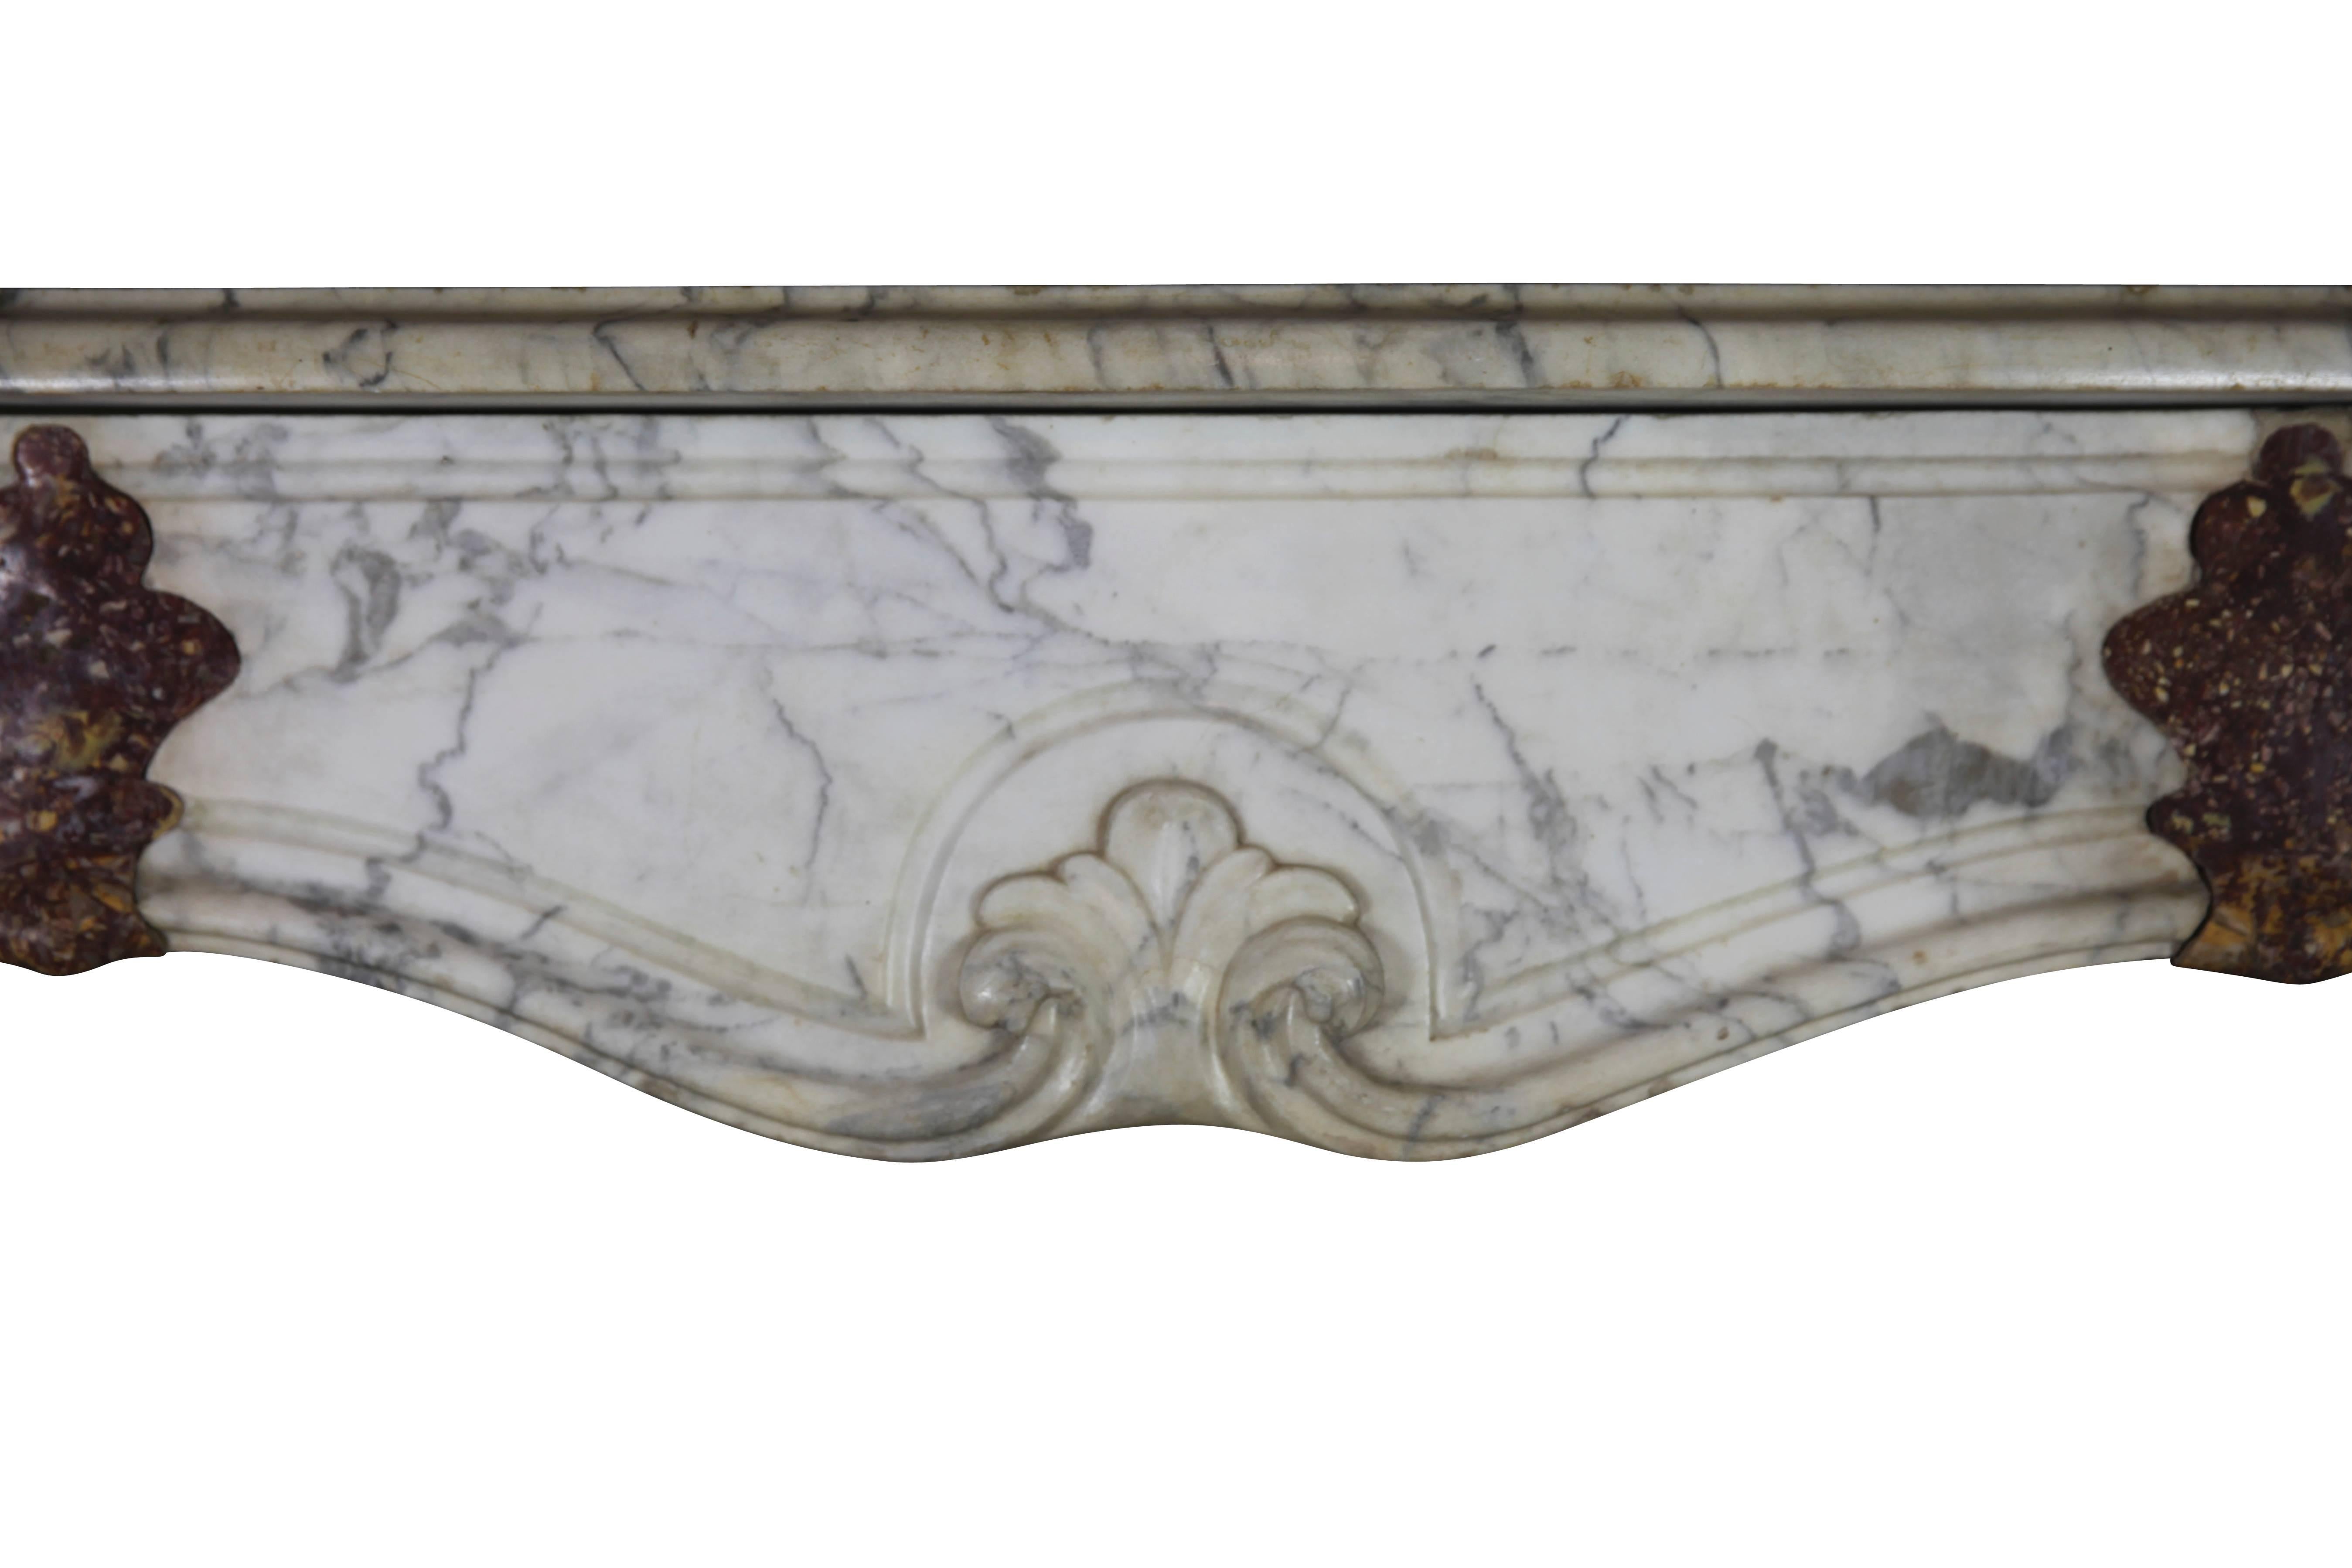 Very exceptional Italian from the region of Florence vintage fireplace surround in Carrara White And Brocatelle de Spain marble. It is from the Louis XIV period, 17th century.
Measurements:
138 cm Exterior Width 54,33 Inch
105 cm Exterior Height